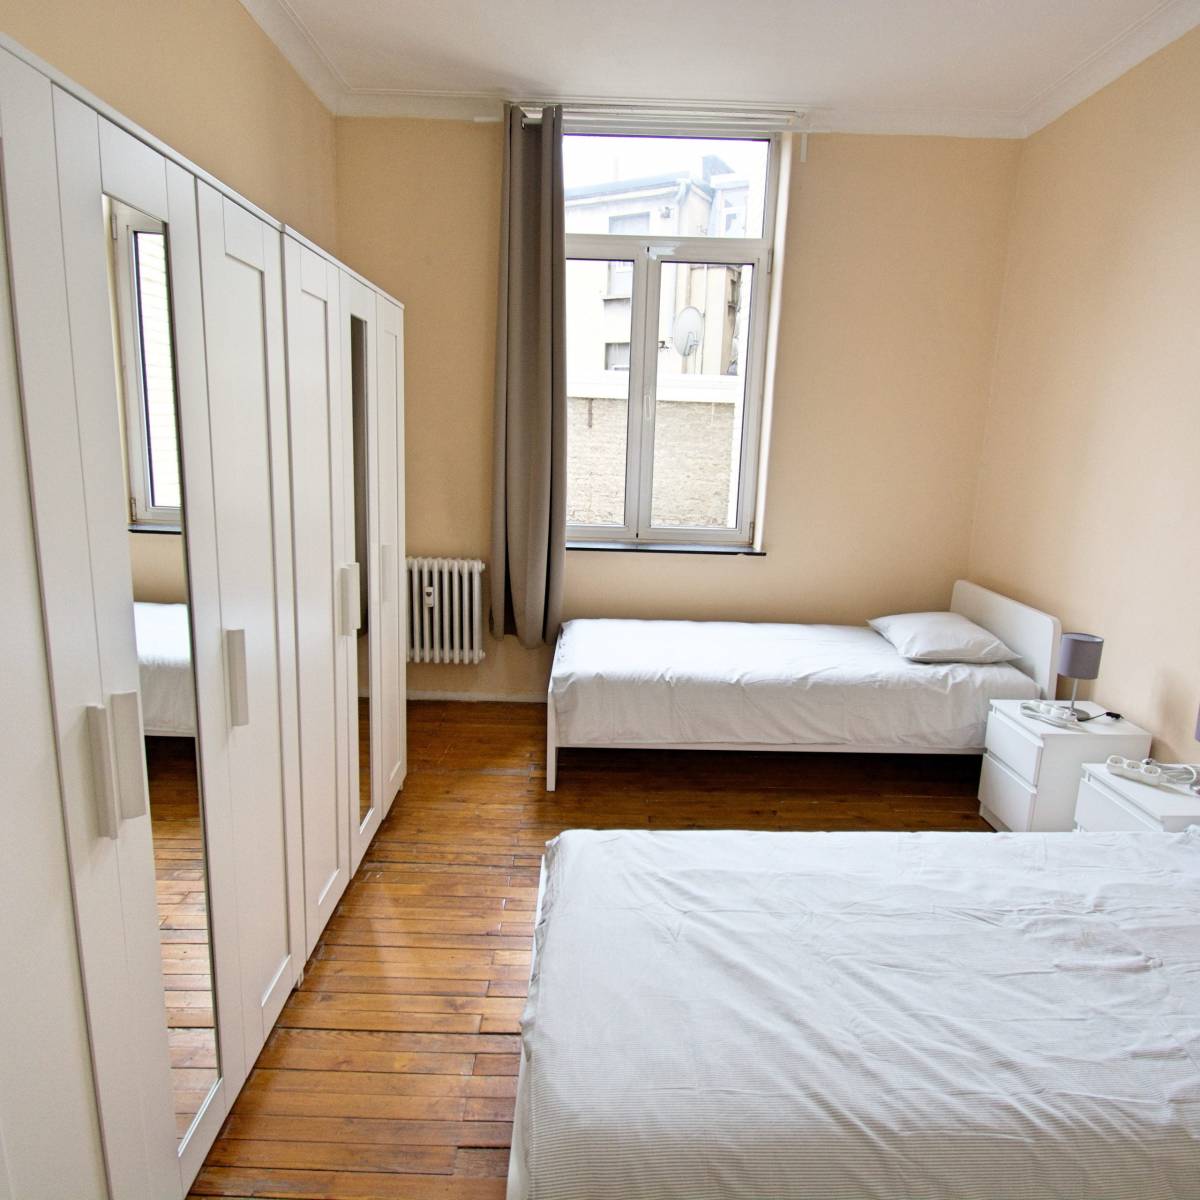 Isabella 5 - Workers accommodation for rent in Antwerp